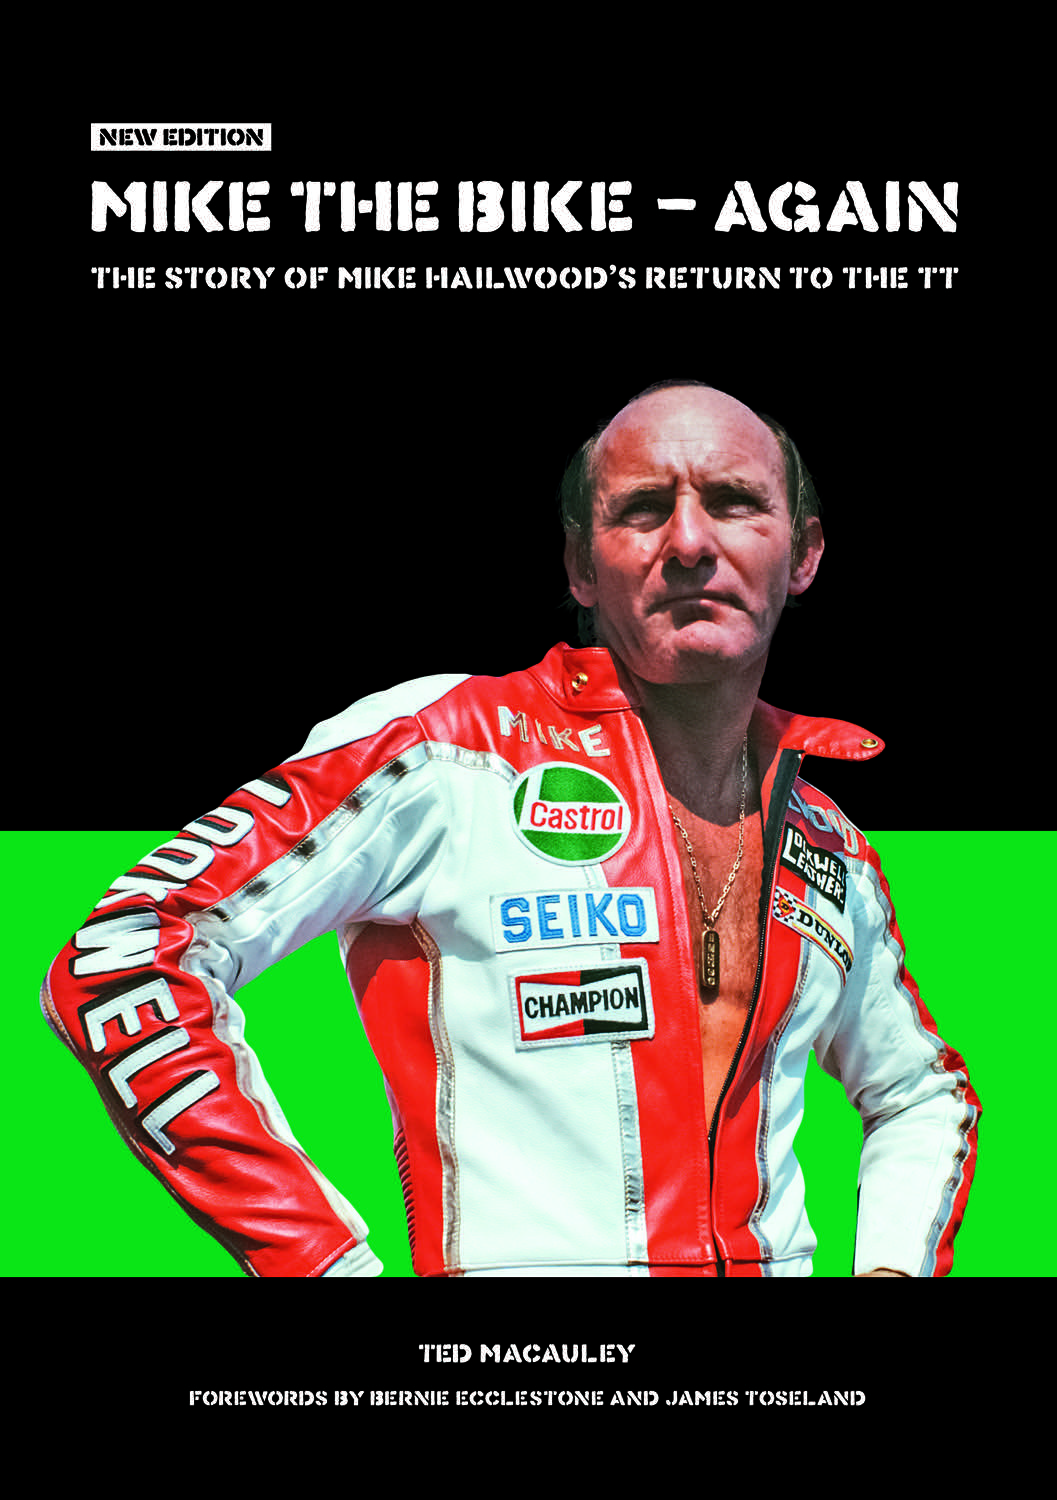 MIKE THE BIKE – AGAIN – New Edition, by Ted Macauley